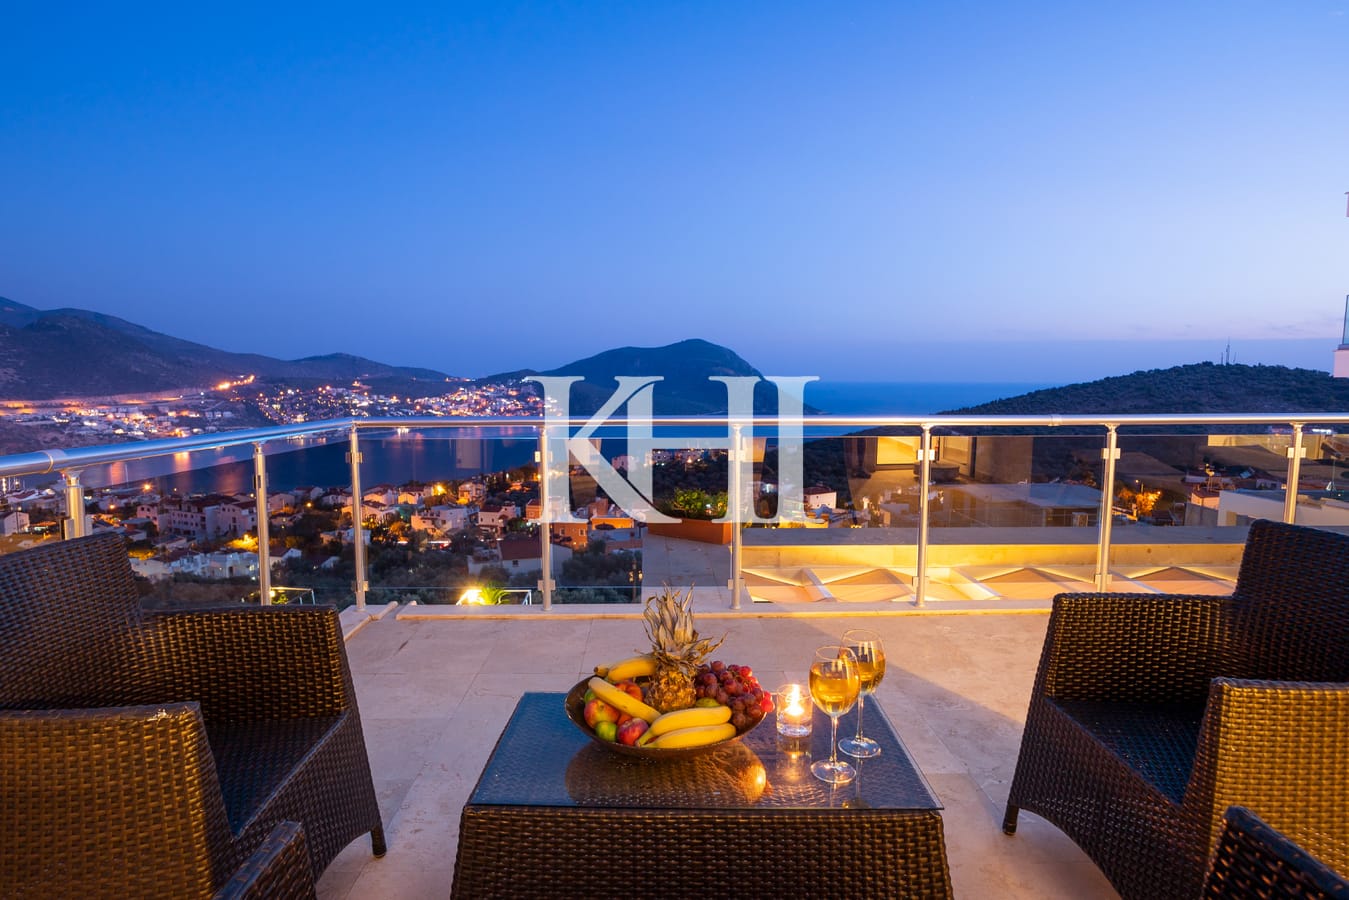 Detached Villa For Sale With Panoramic Kalkan View Slide Image 16